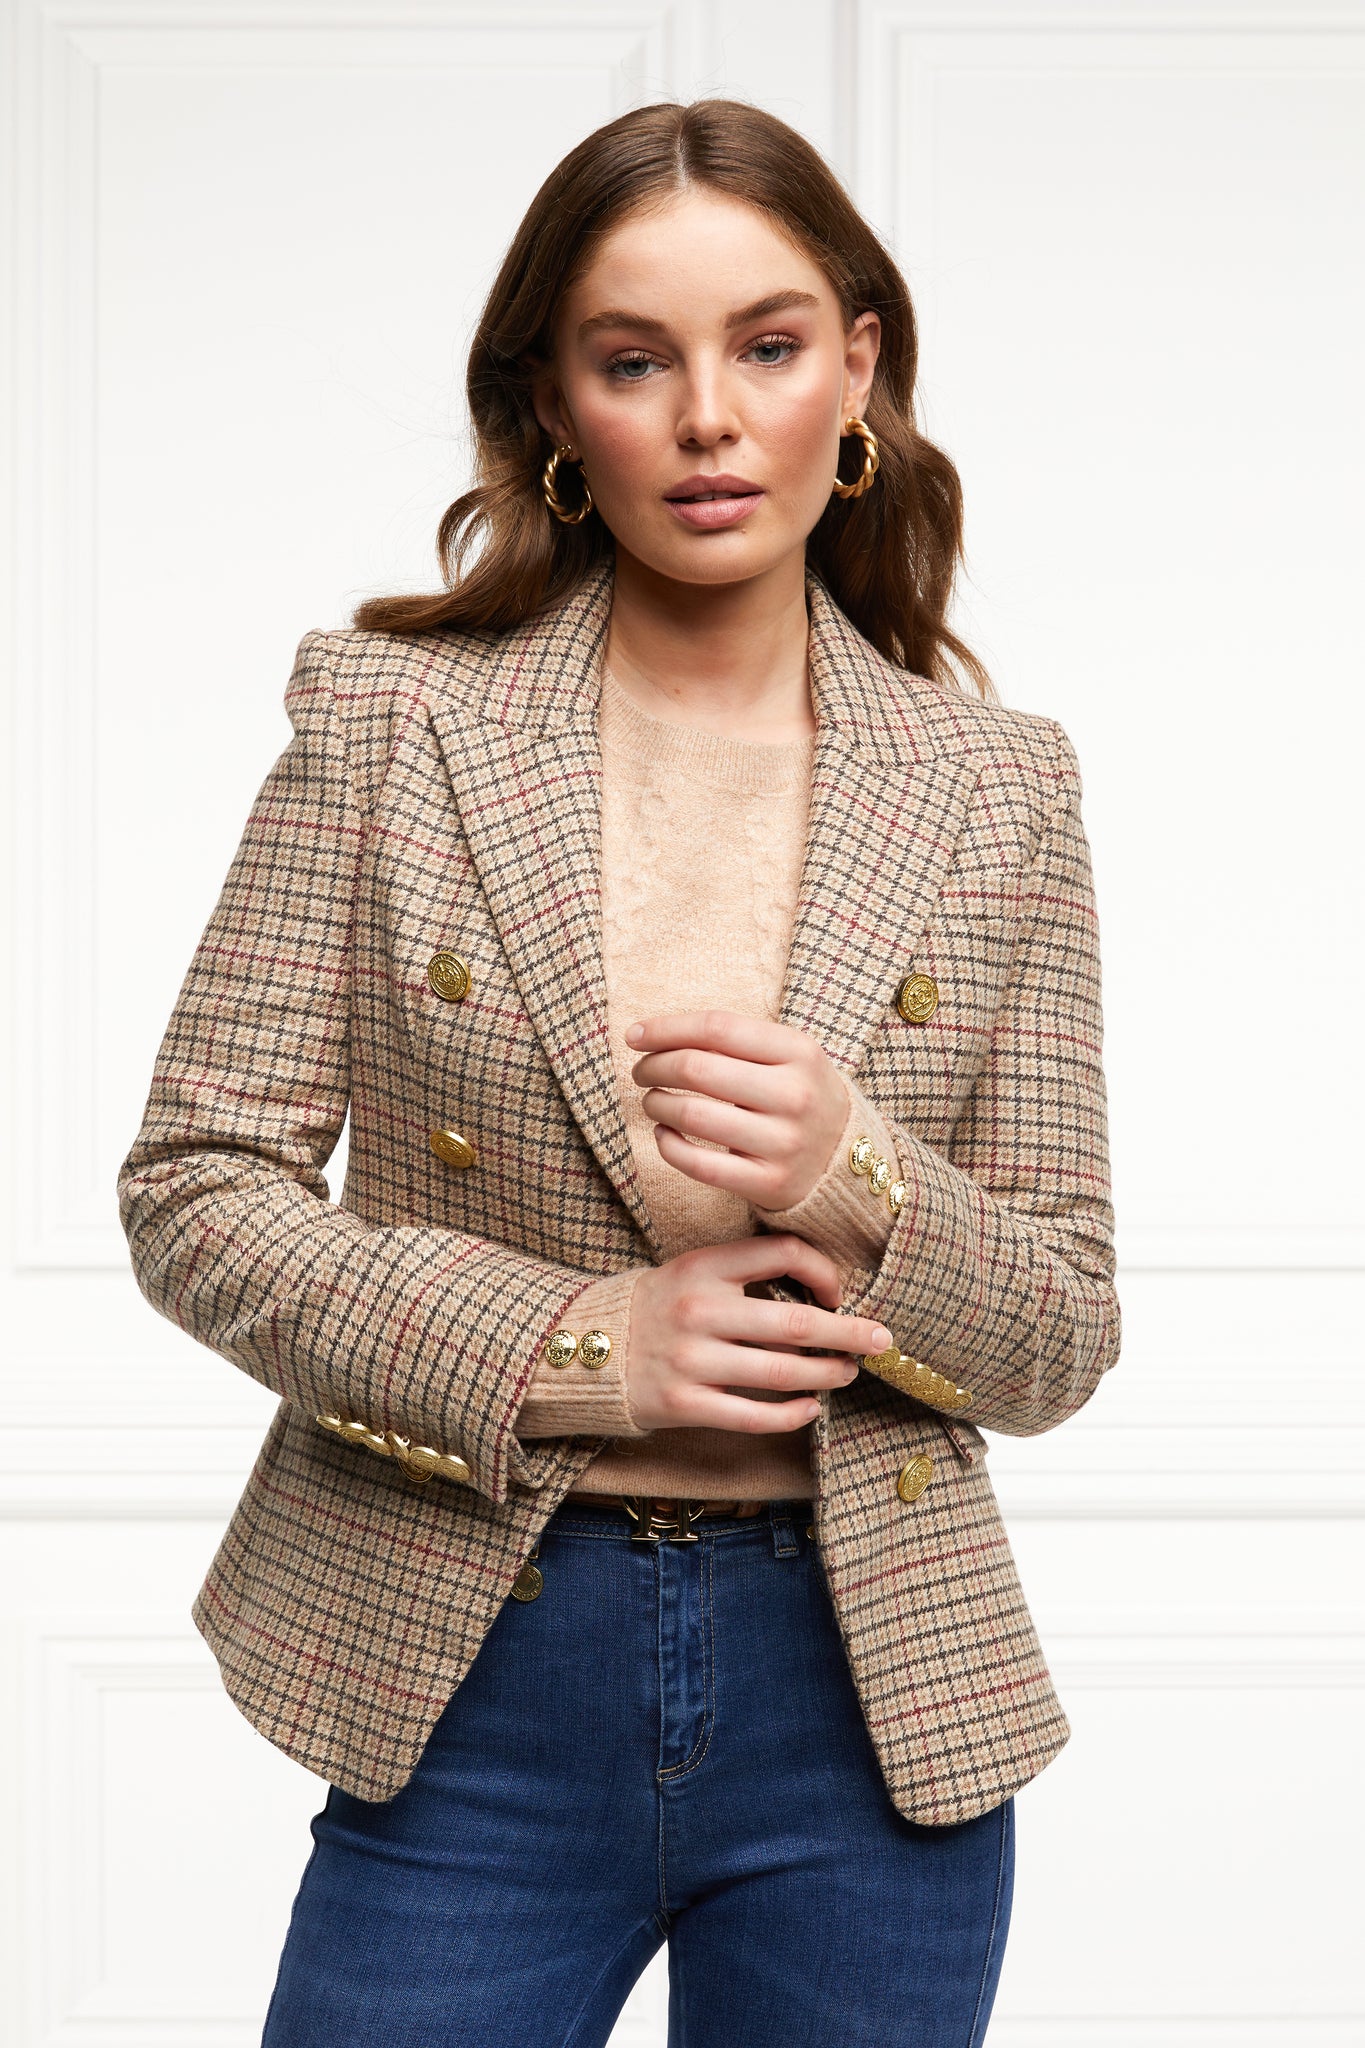 British made double breasted blazer that fastens with a single button hole to create a more form fitting silhouette with two pockets and gold button detailing this blazer is made from camel black and red check charlton tweed